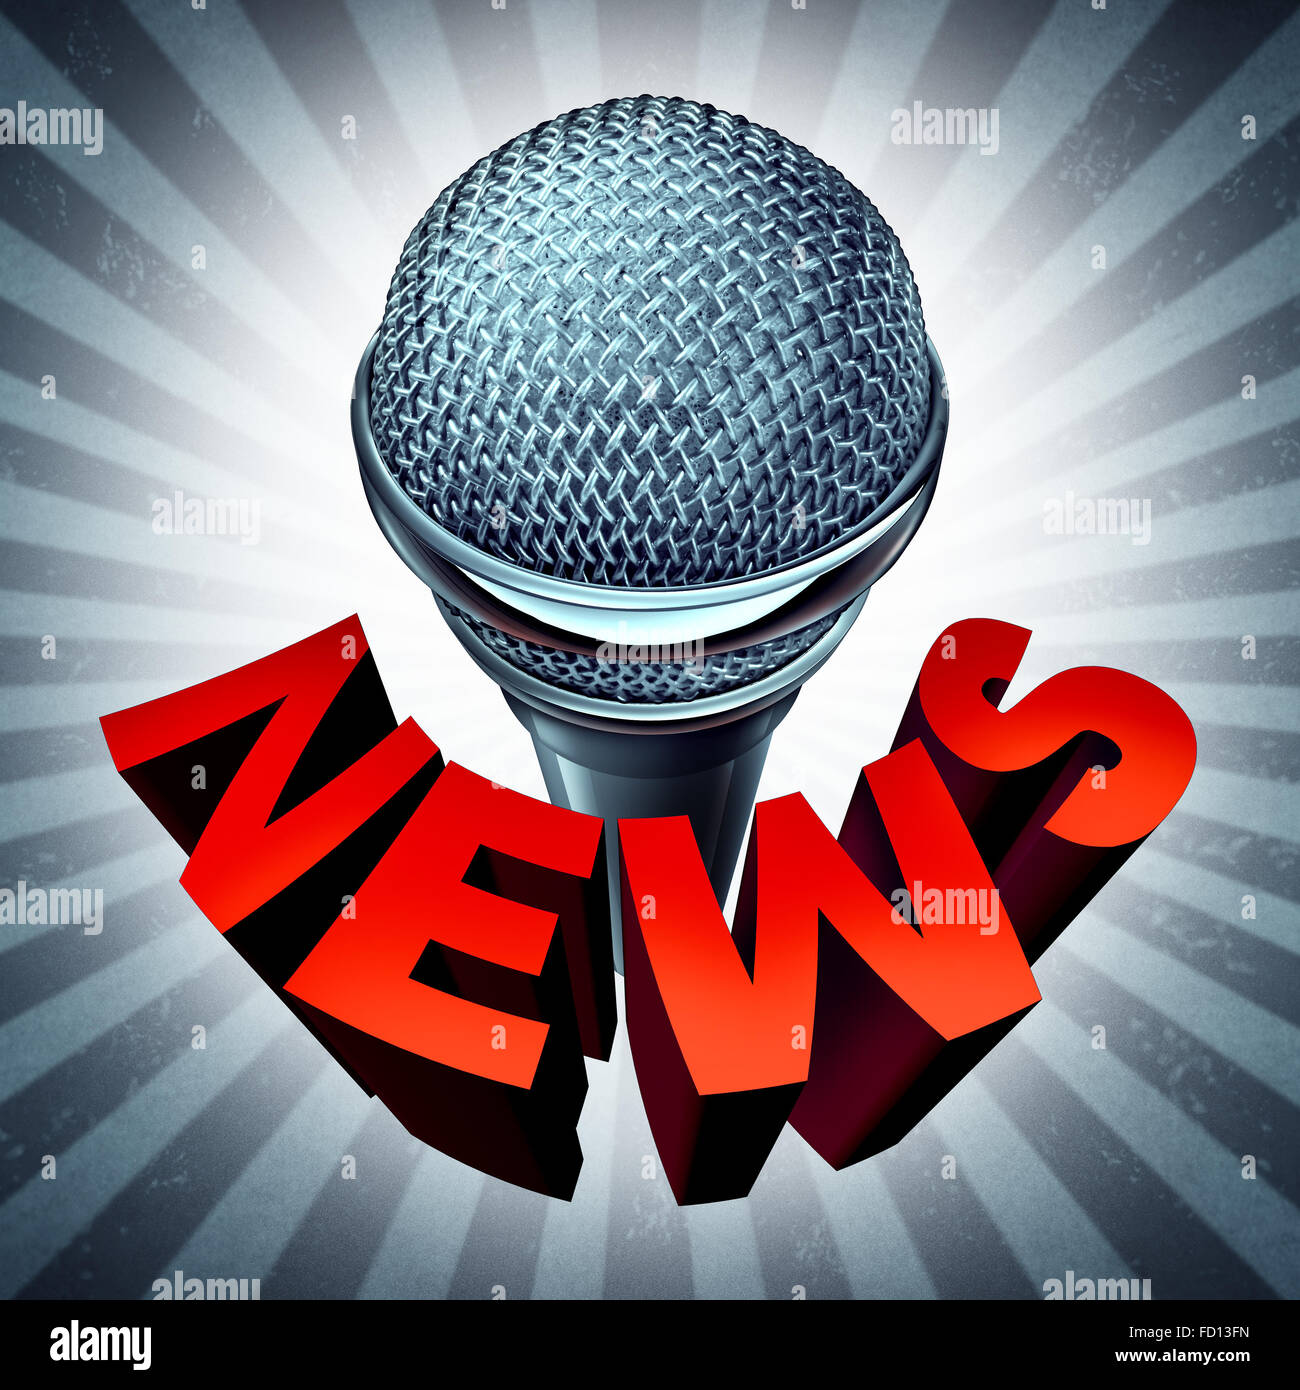 News microphone icon as a broadcasting and journalism symbol and a reporting of current affairs on the internet or radio and television media. Stock Photo